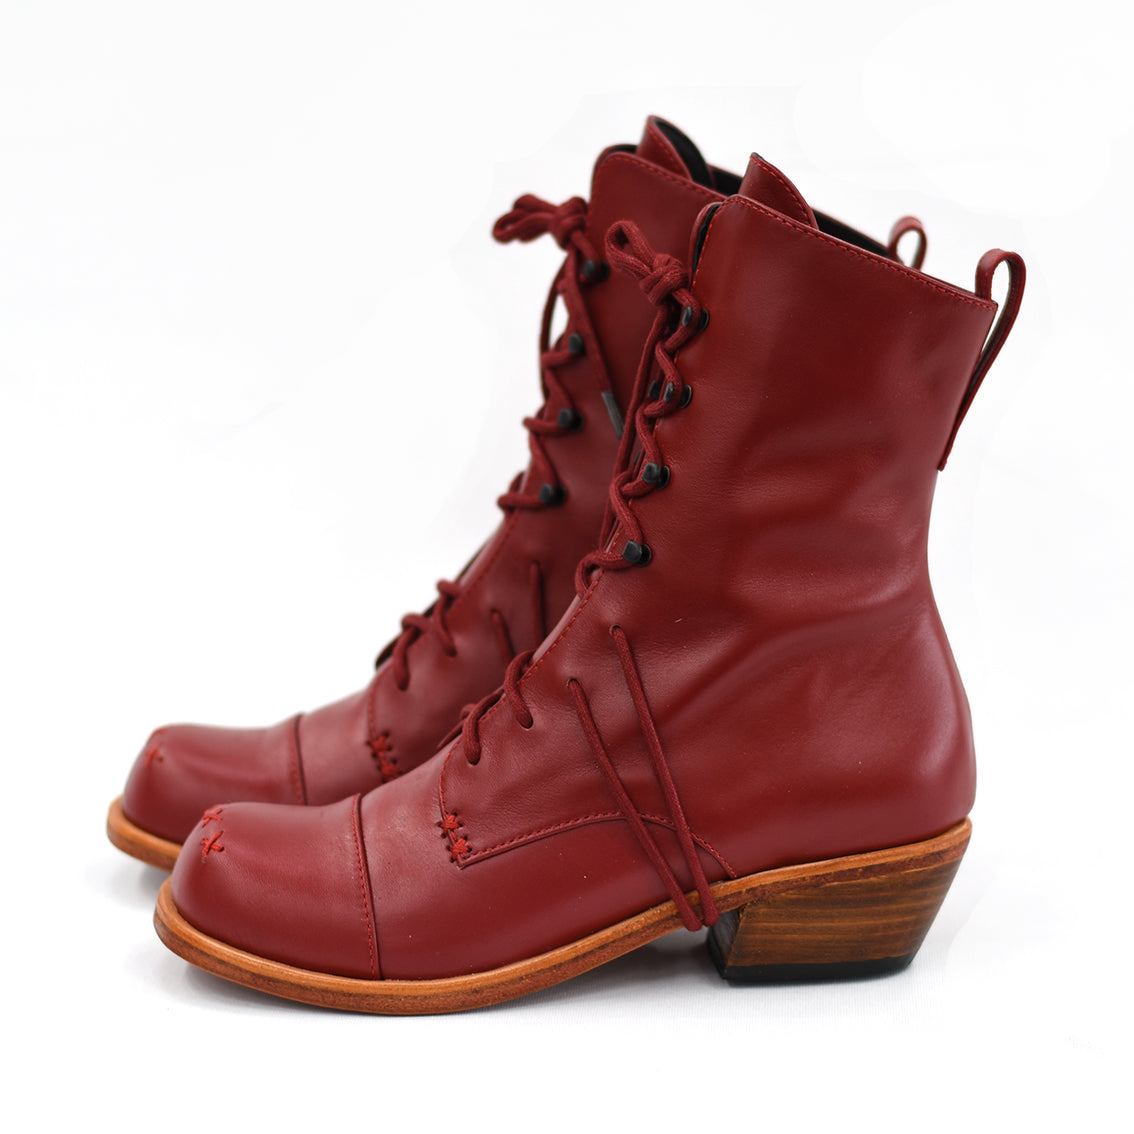 The Banner Boot - Red, Spectacular on grey winter days